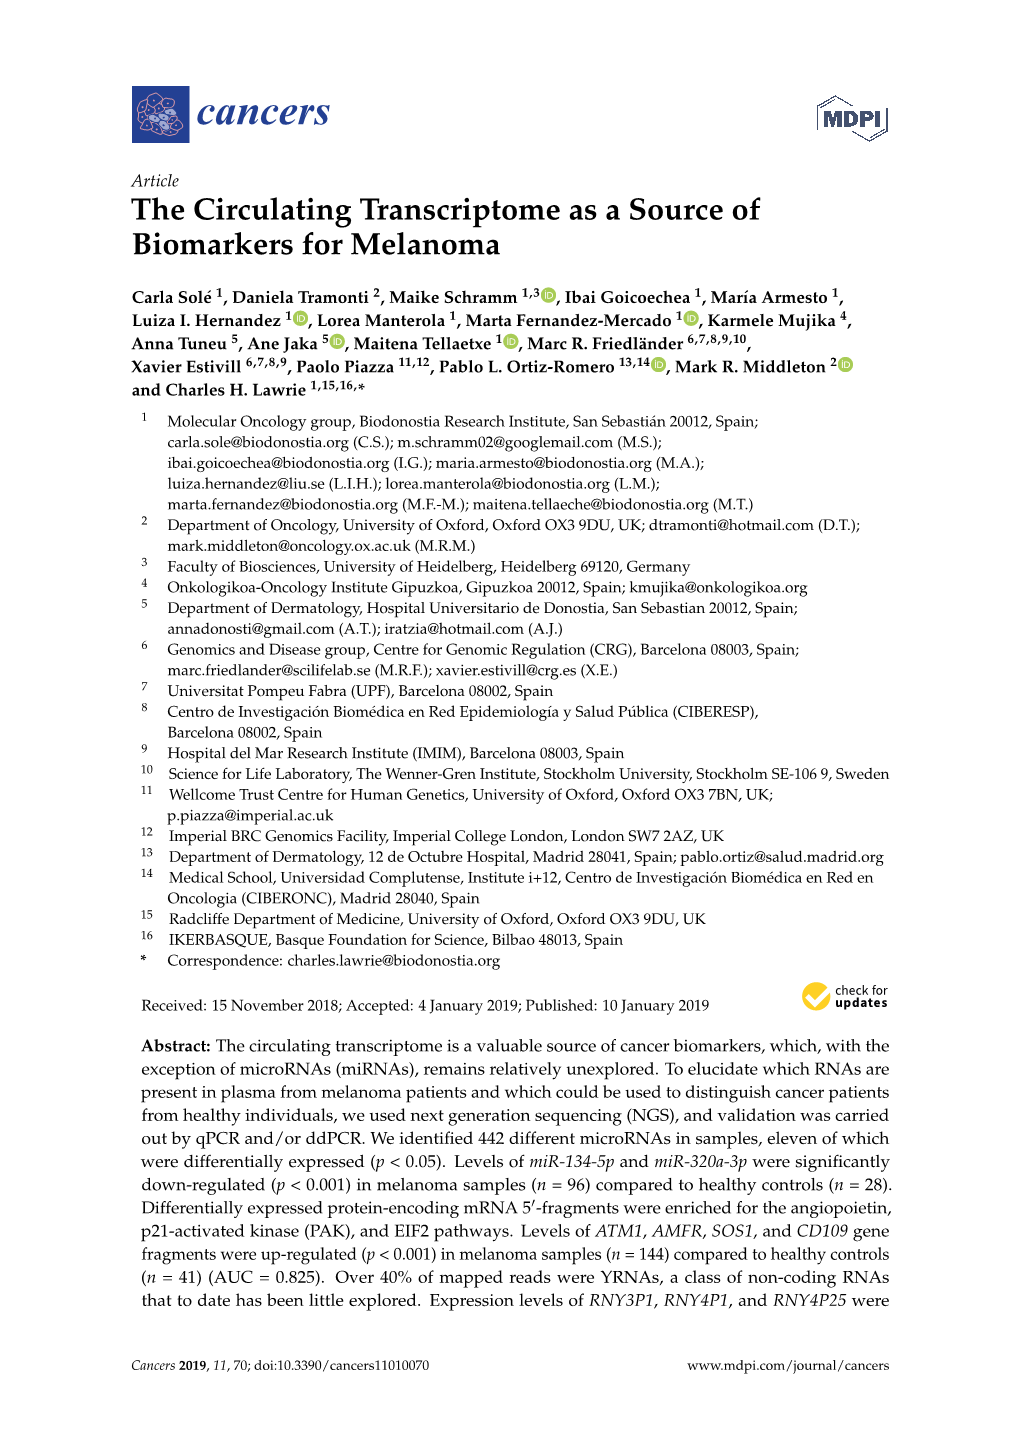 The Circulating Transcriptome As a Source of Biomarkers for Melanoma